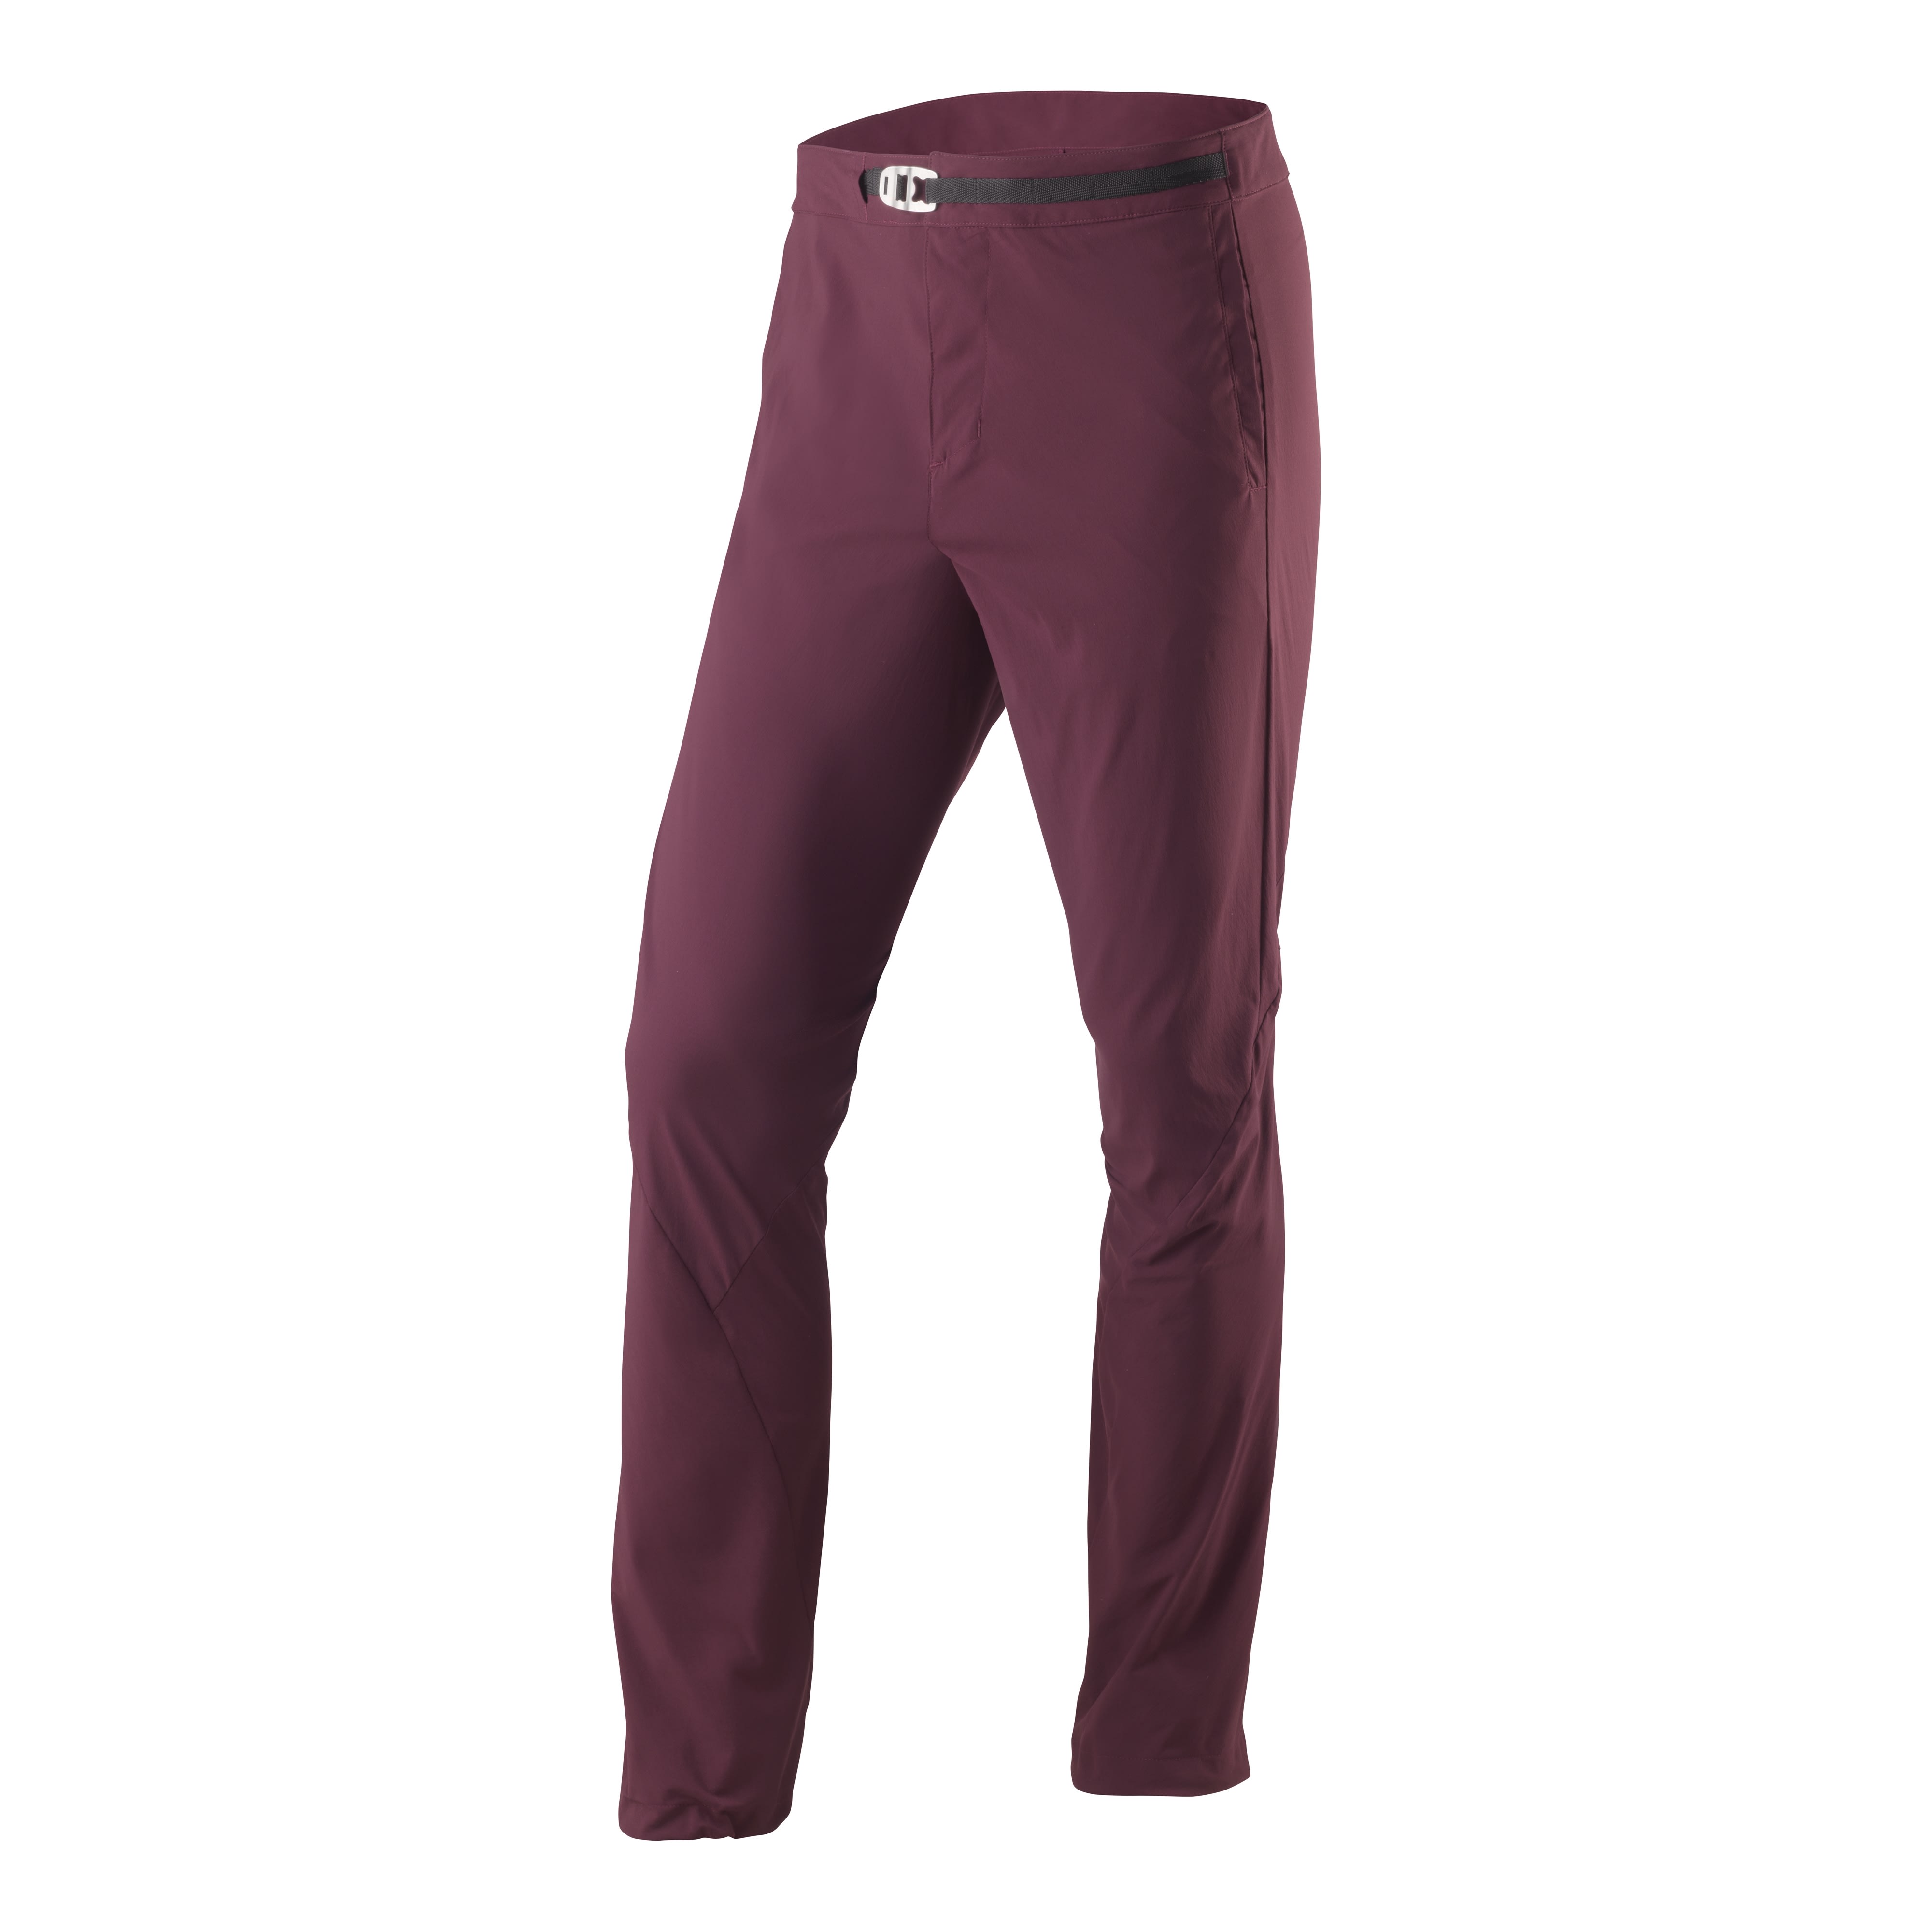 Buy Houdini M's Lucid Pants from Outnorth